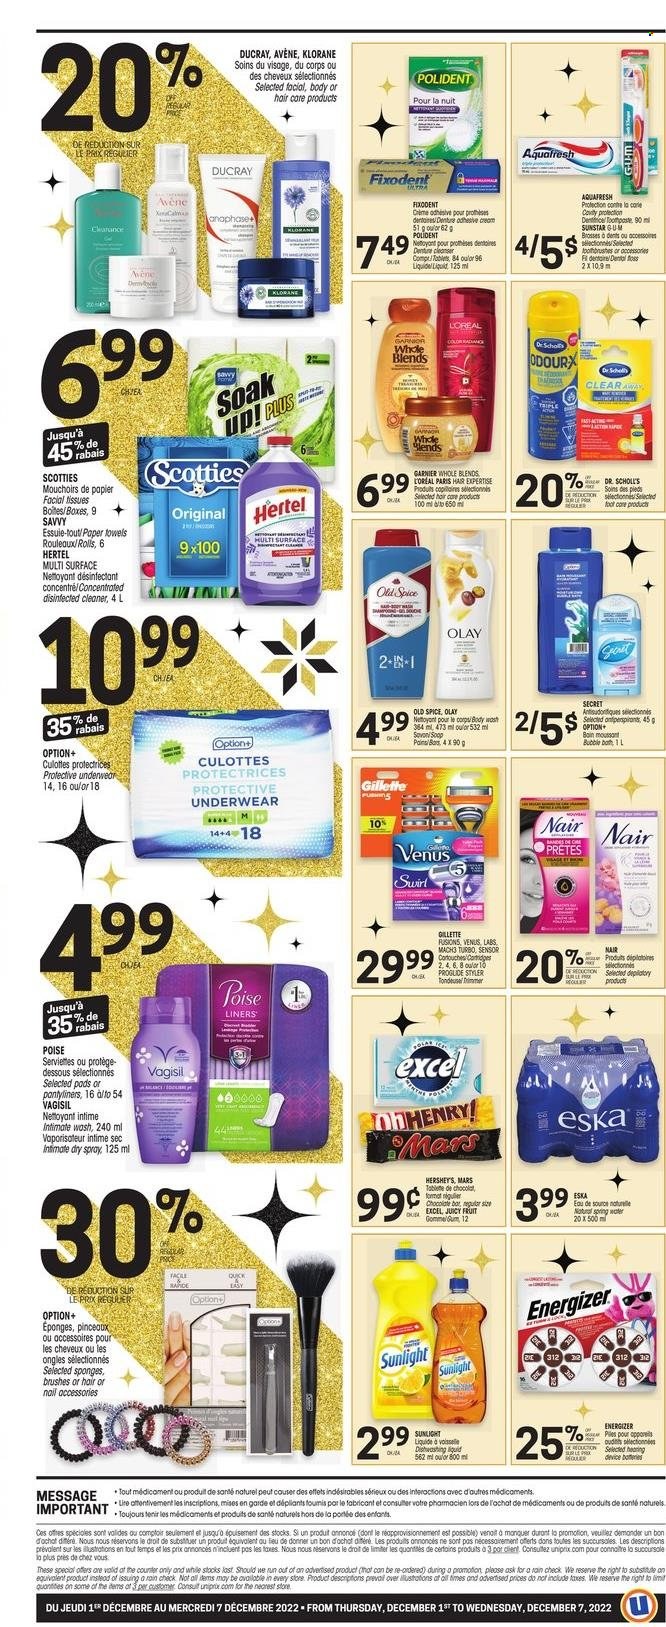 thumbnail - Uniprix Flyer - December 01, 2022 - December 07, 2022 - Sales products - Mars, Hershey's, chocolate bar, spice, spring water, kitchen towels, paper towels, cleaner, Sunlight, dishwashing liquid, Fixodent, Polident, pantyliners, cleanser, Gillette, L’Oréal, Olay, Klorane, anti-perspirant, Venus, foot care, Dr. Scholl's, Energizer, Garnier, Old Spice. Page 2.